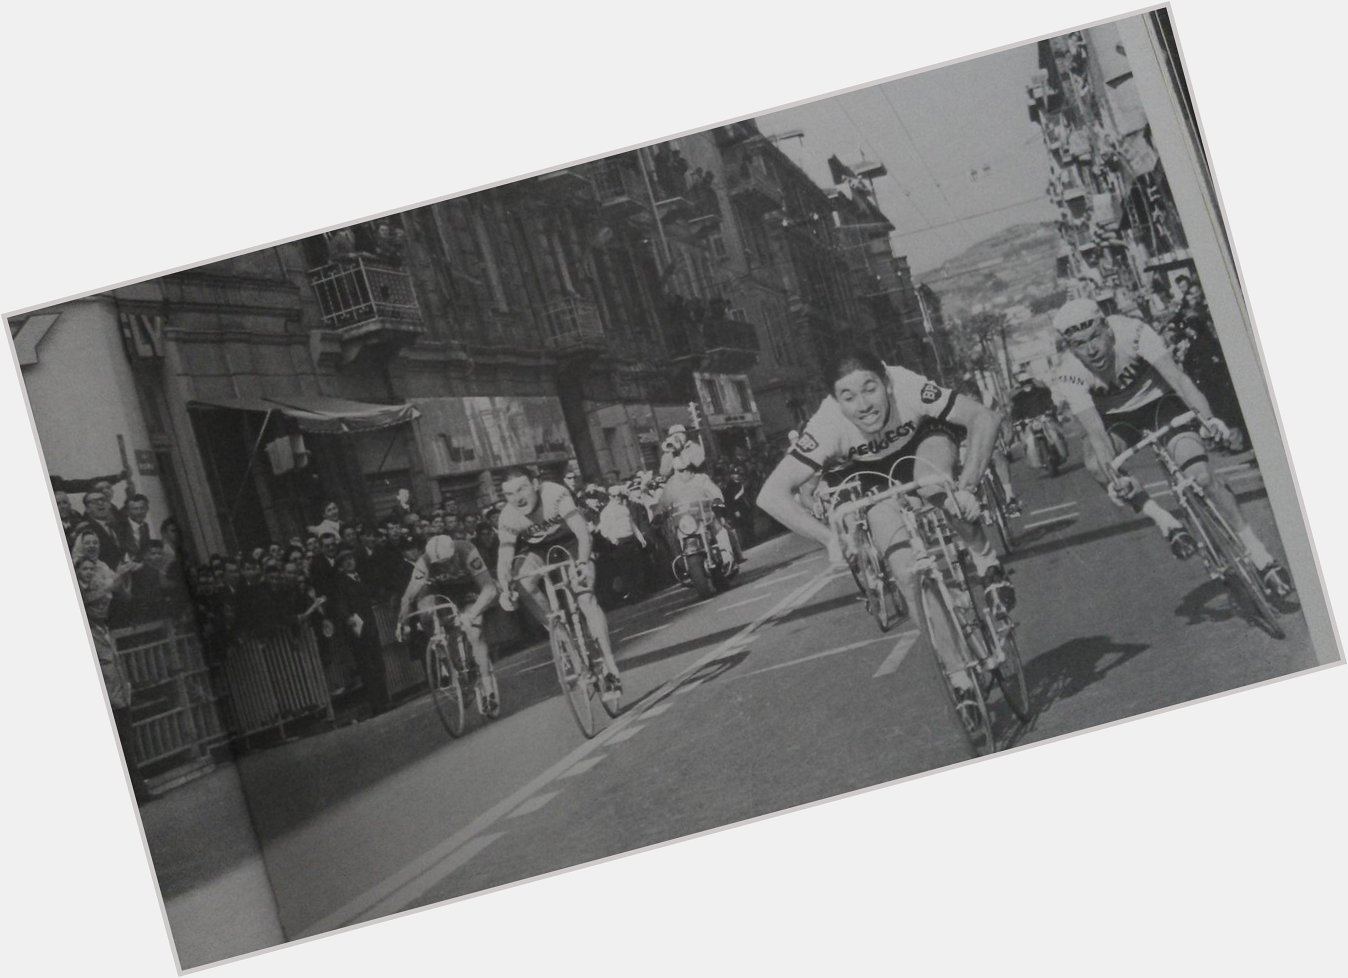 Happy 70th birthday to Eddy Merckx! Here he is winning Milan-San Remo in 1966 at just 20 years of age. 